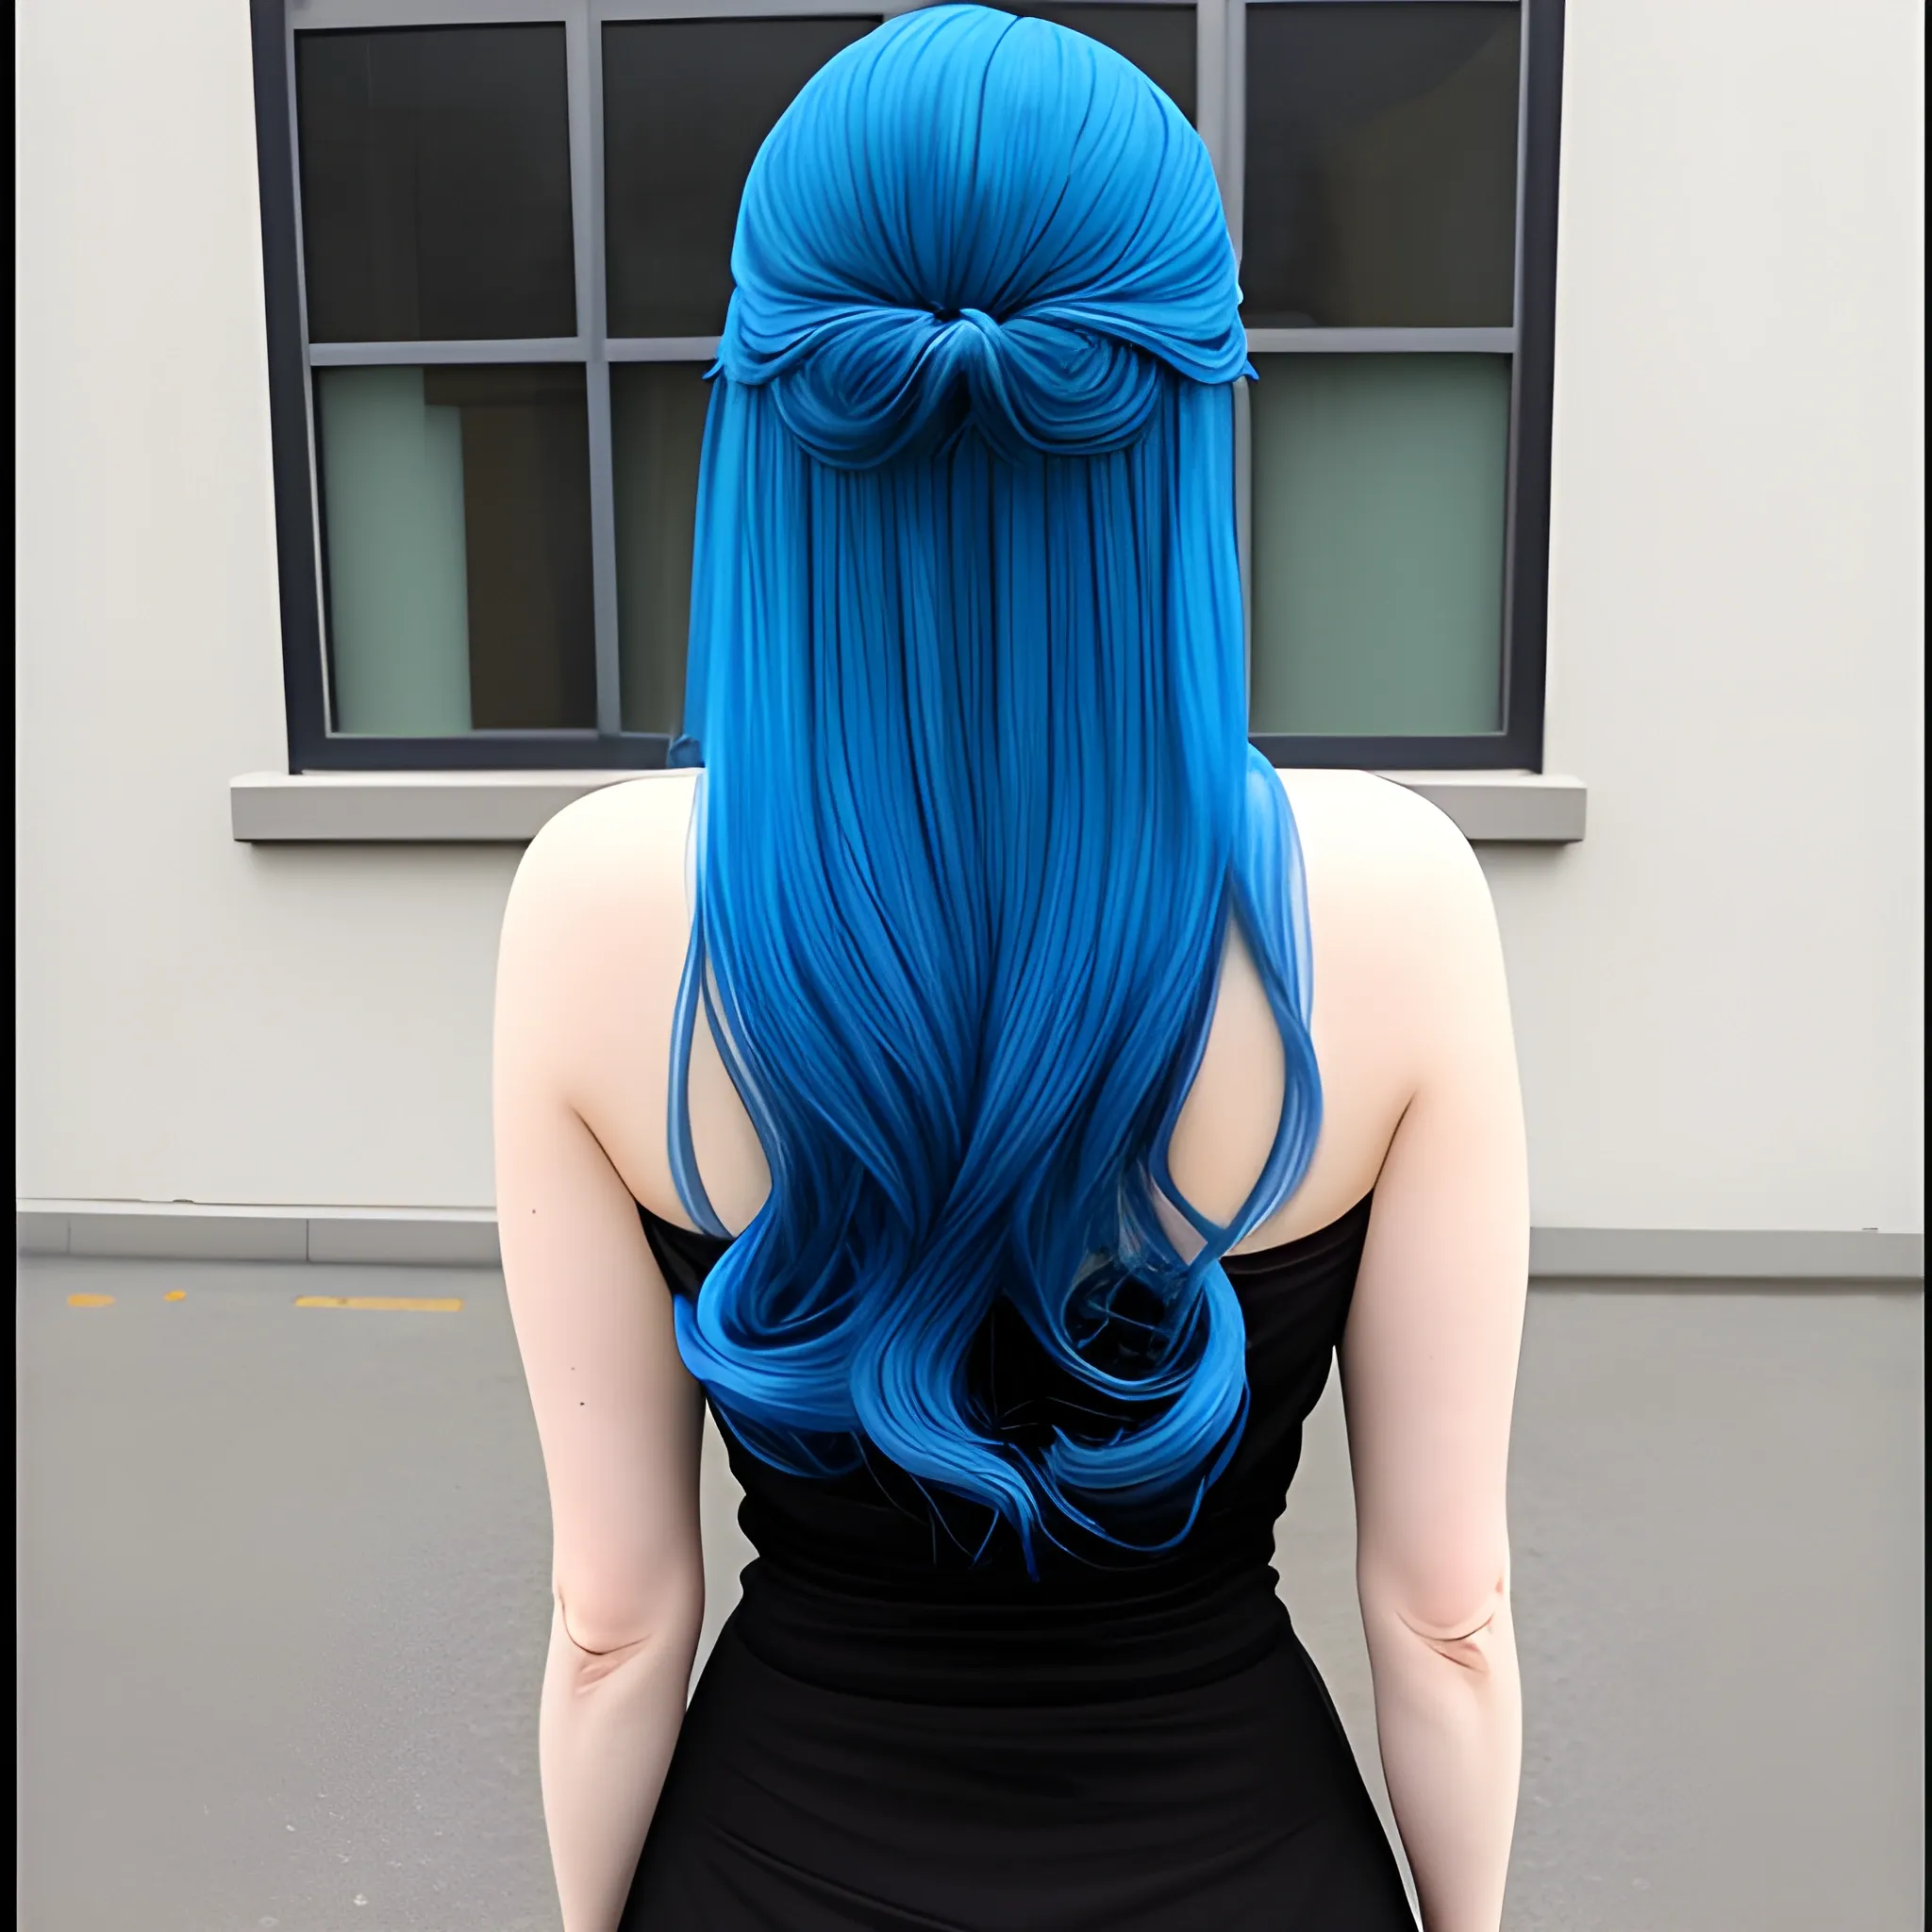 Girl Big eyes, blue hair, back view , girl anime , no more fingers, no more arms and foots
